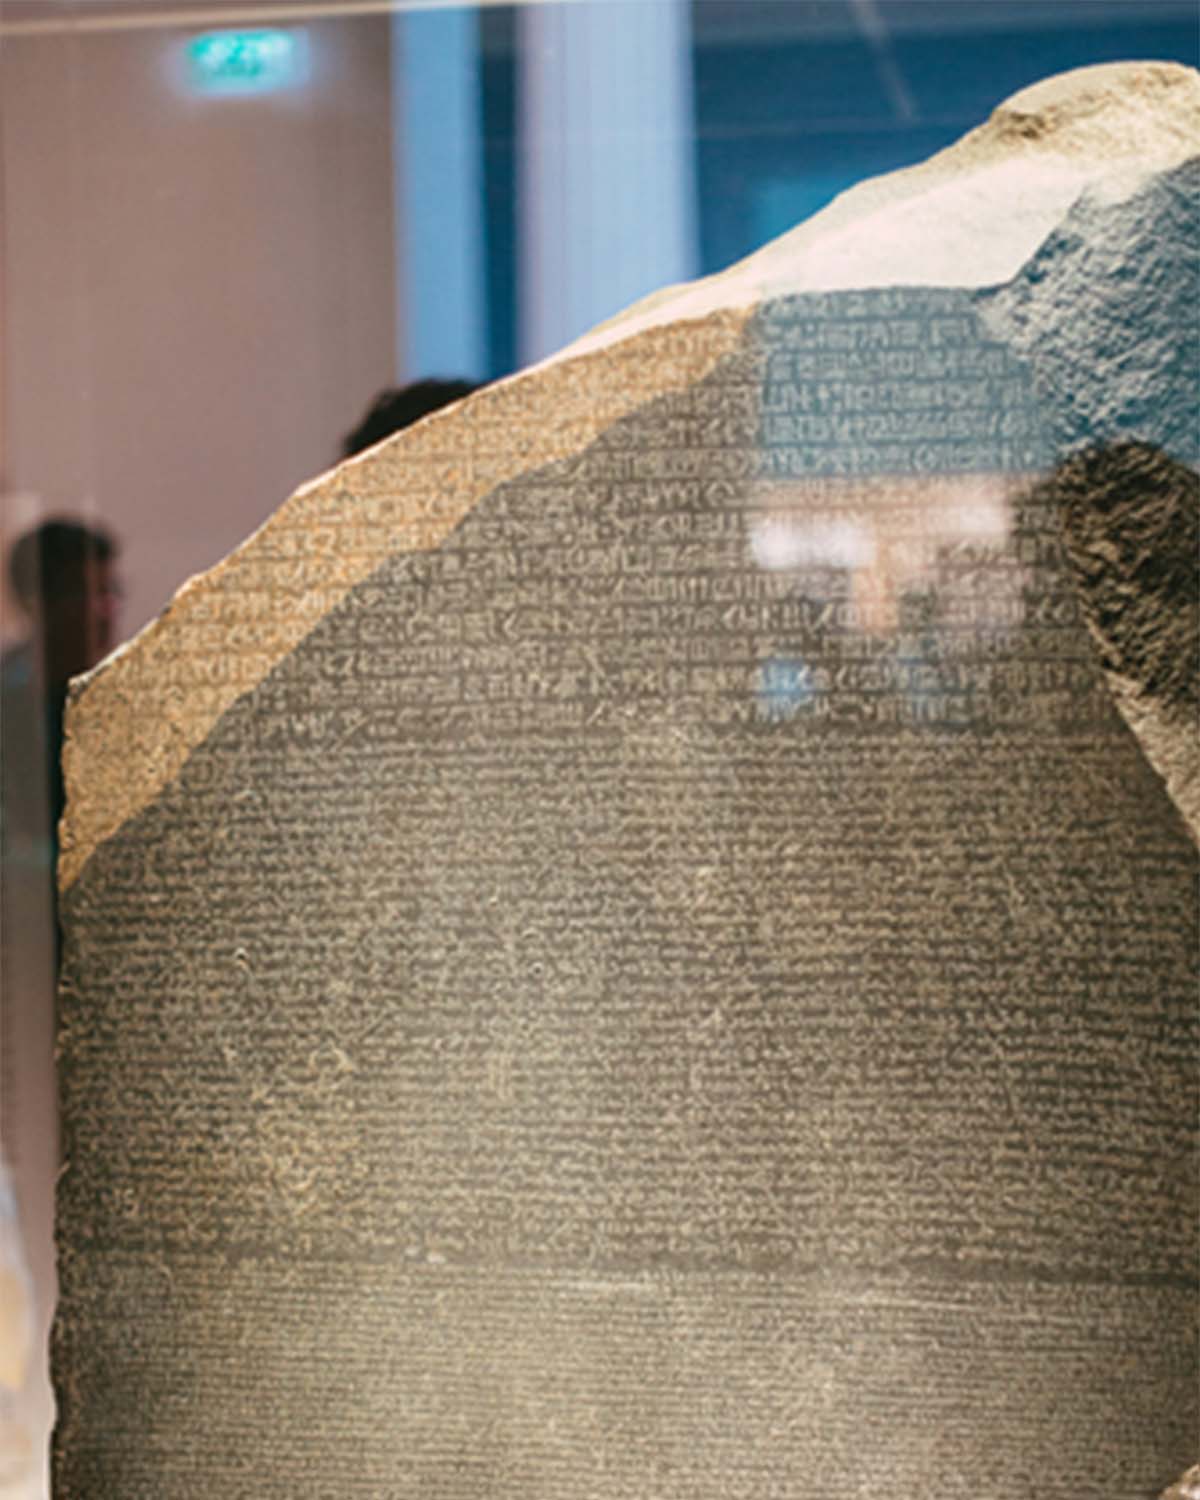 Featured Post Image - Archaeology is proofing the Bible is Real – Rosetta Stone